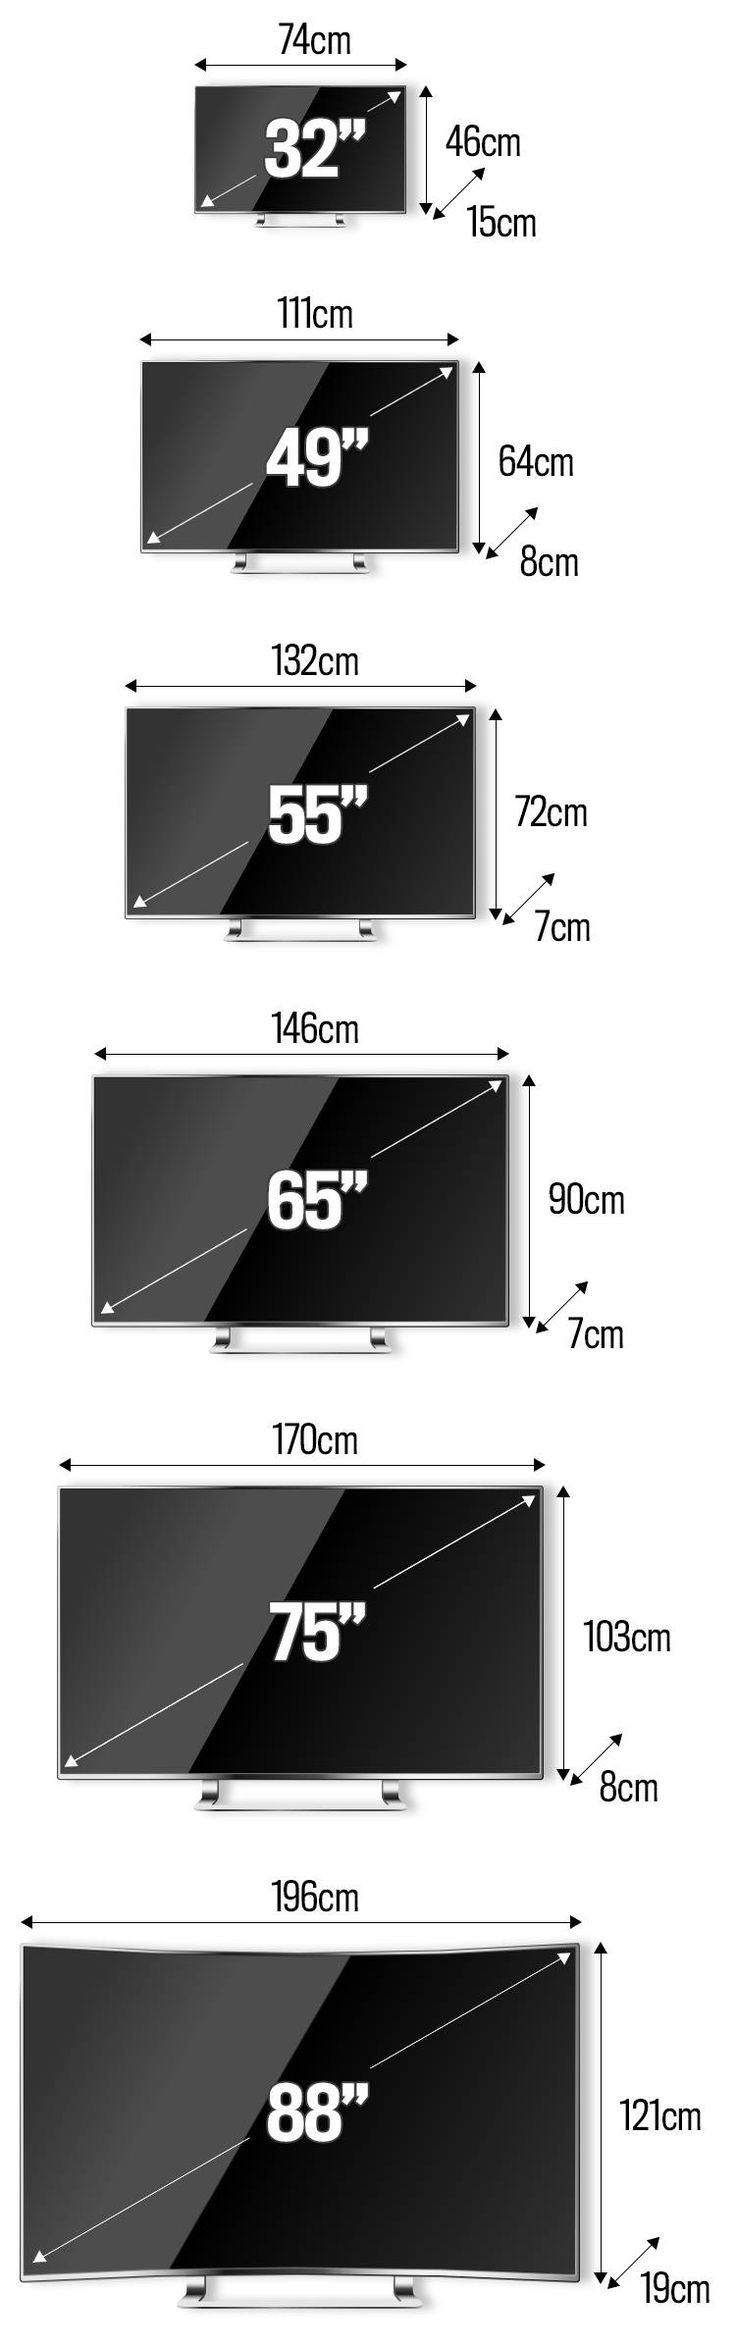 What are the standard flat-screen TV sizes Comparison